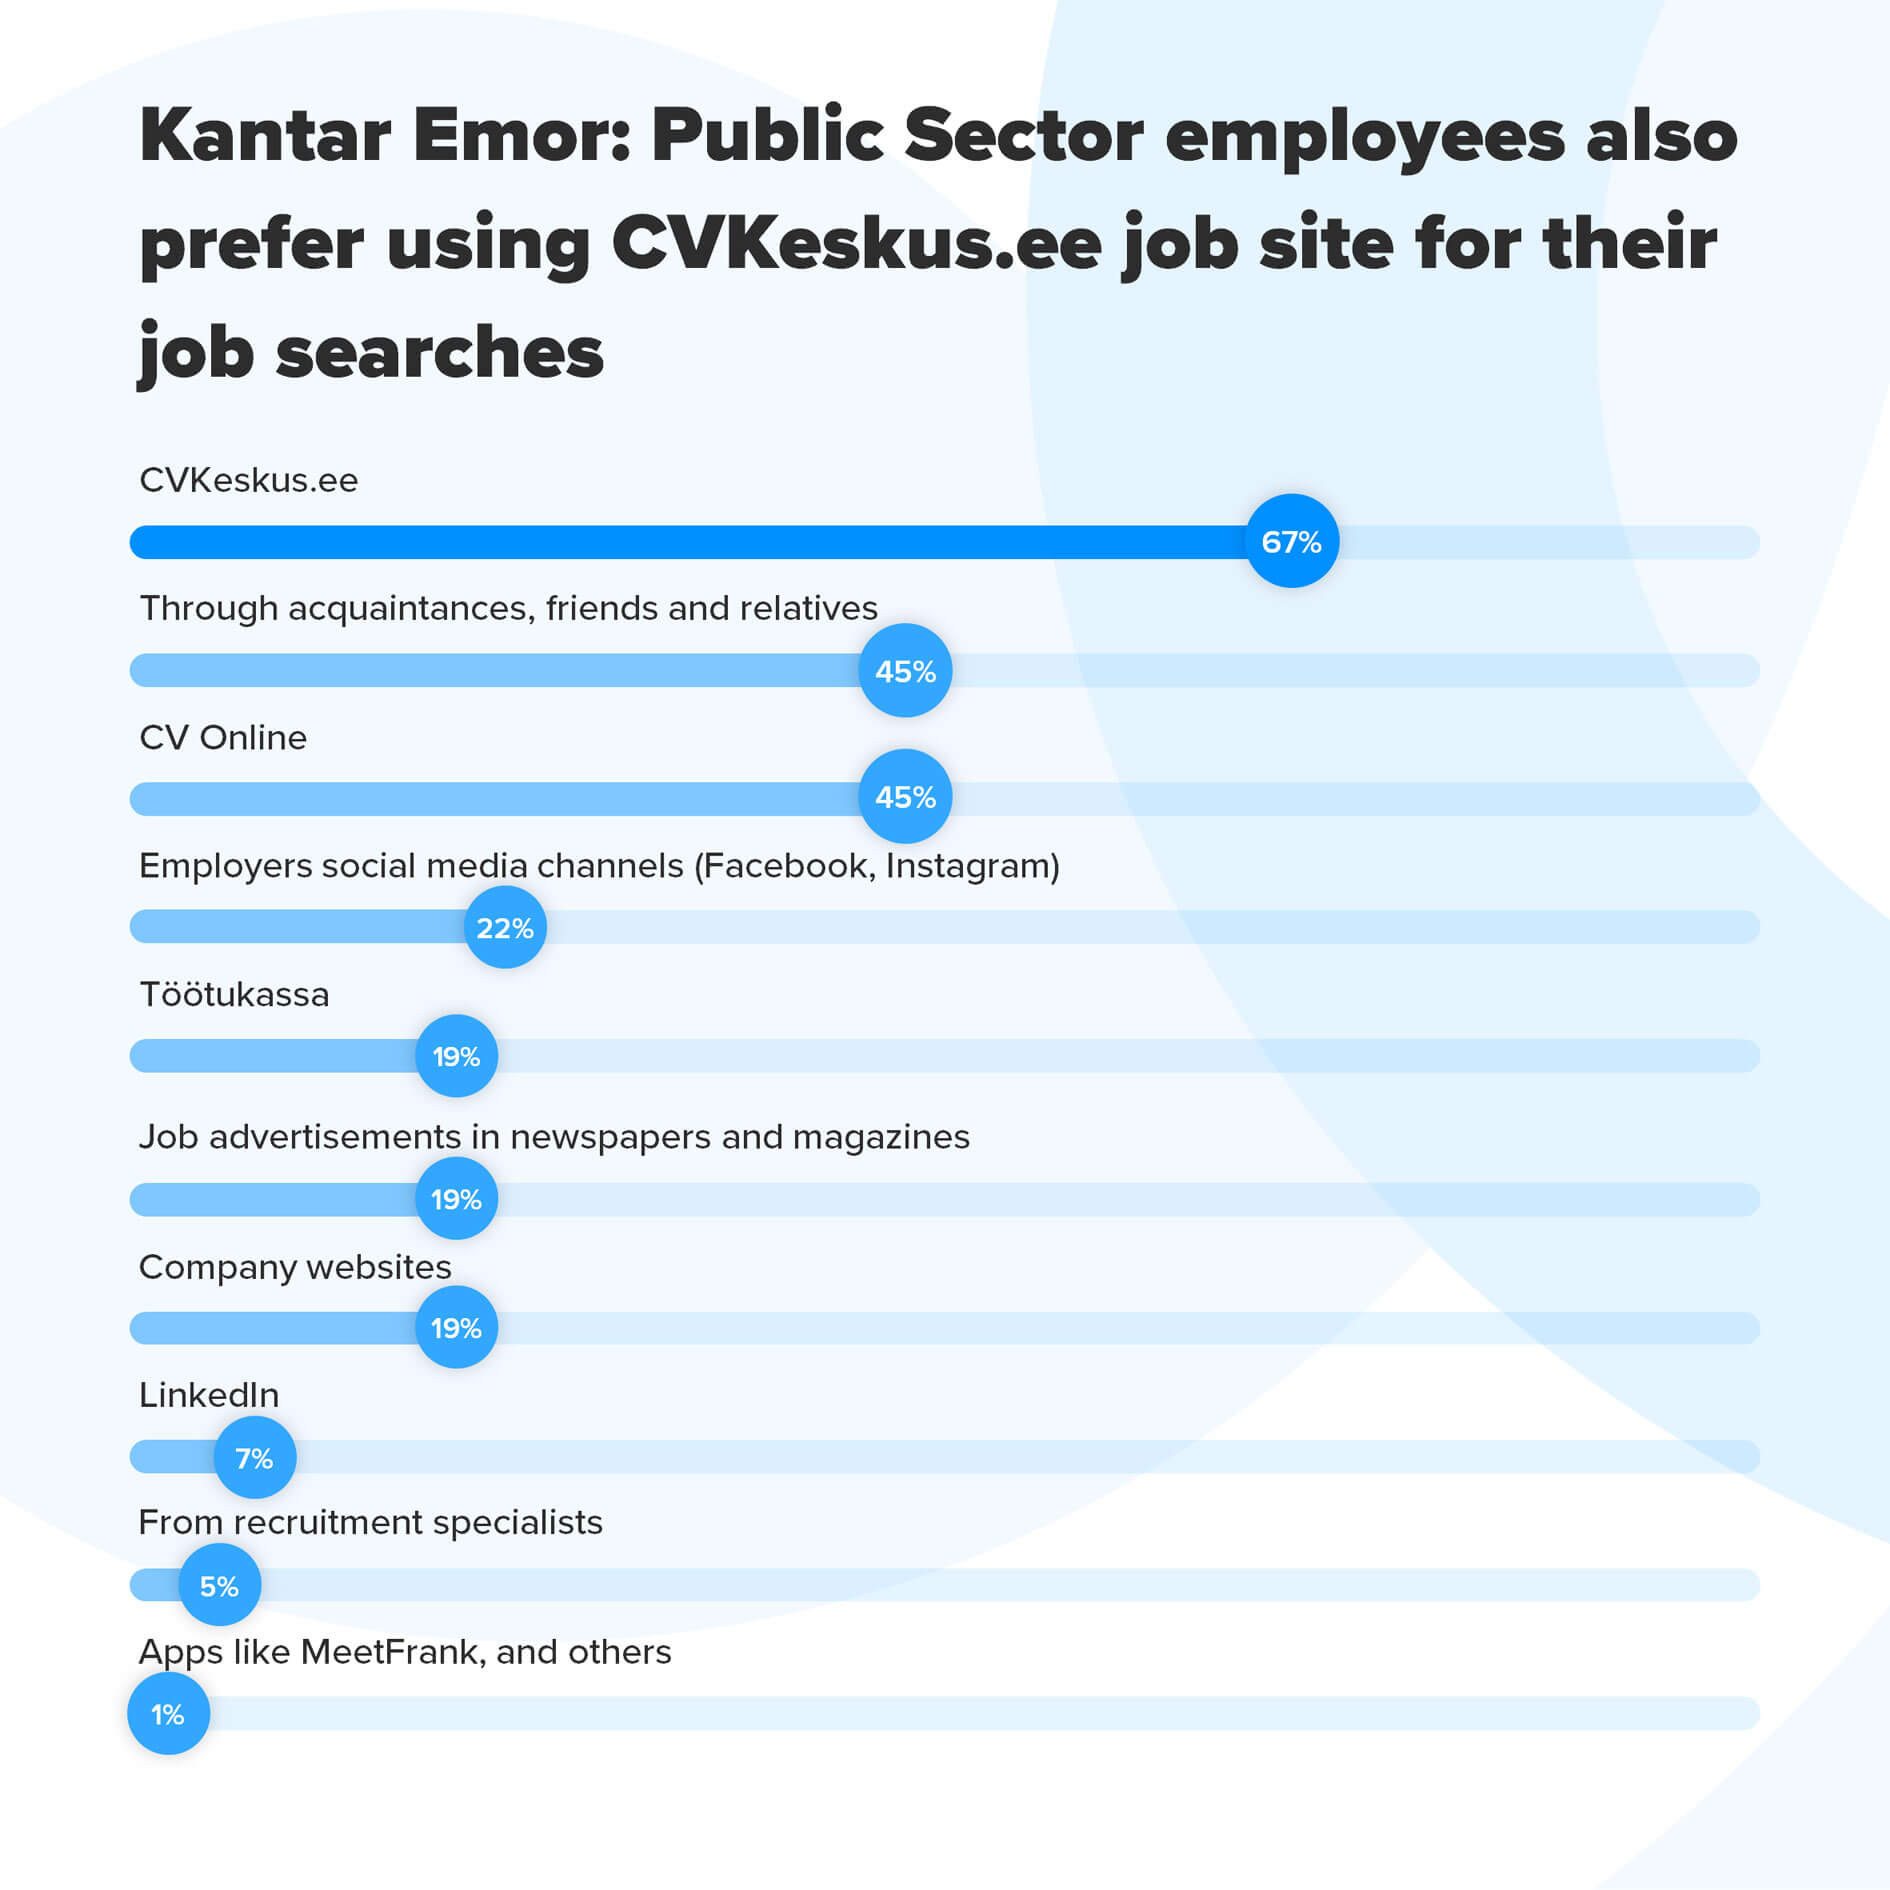 The Kantar Emor survey revealed the most preferred job search channels of public sector employees